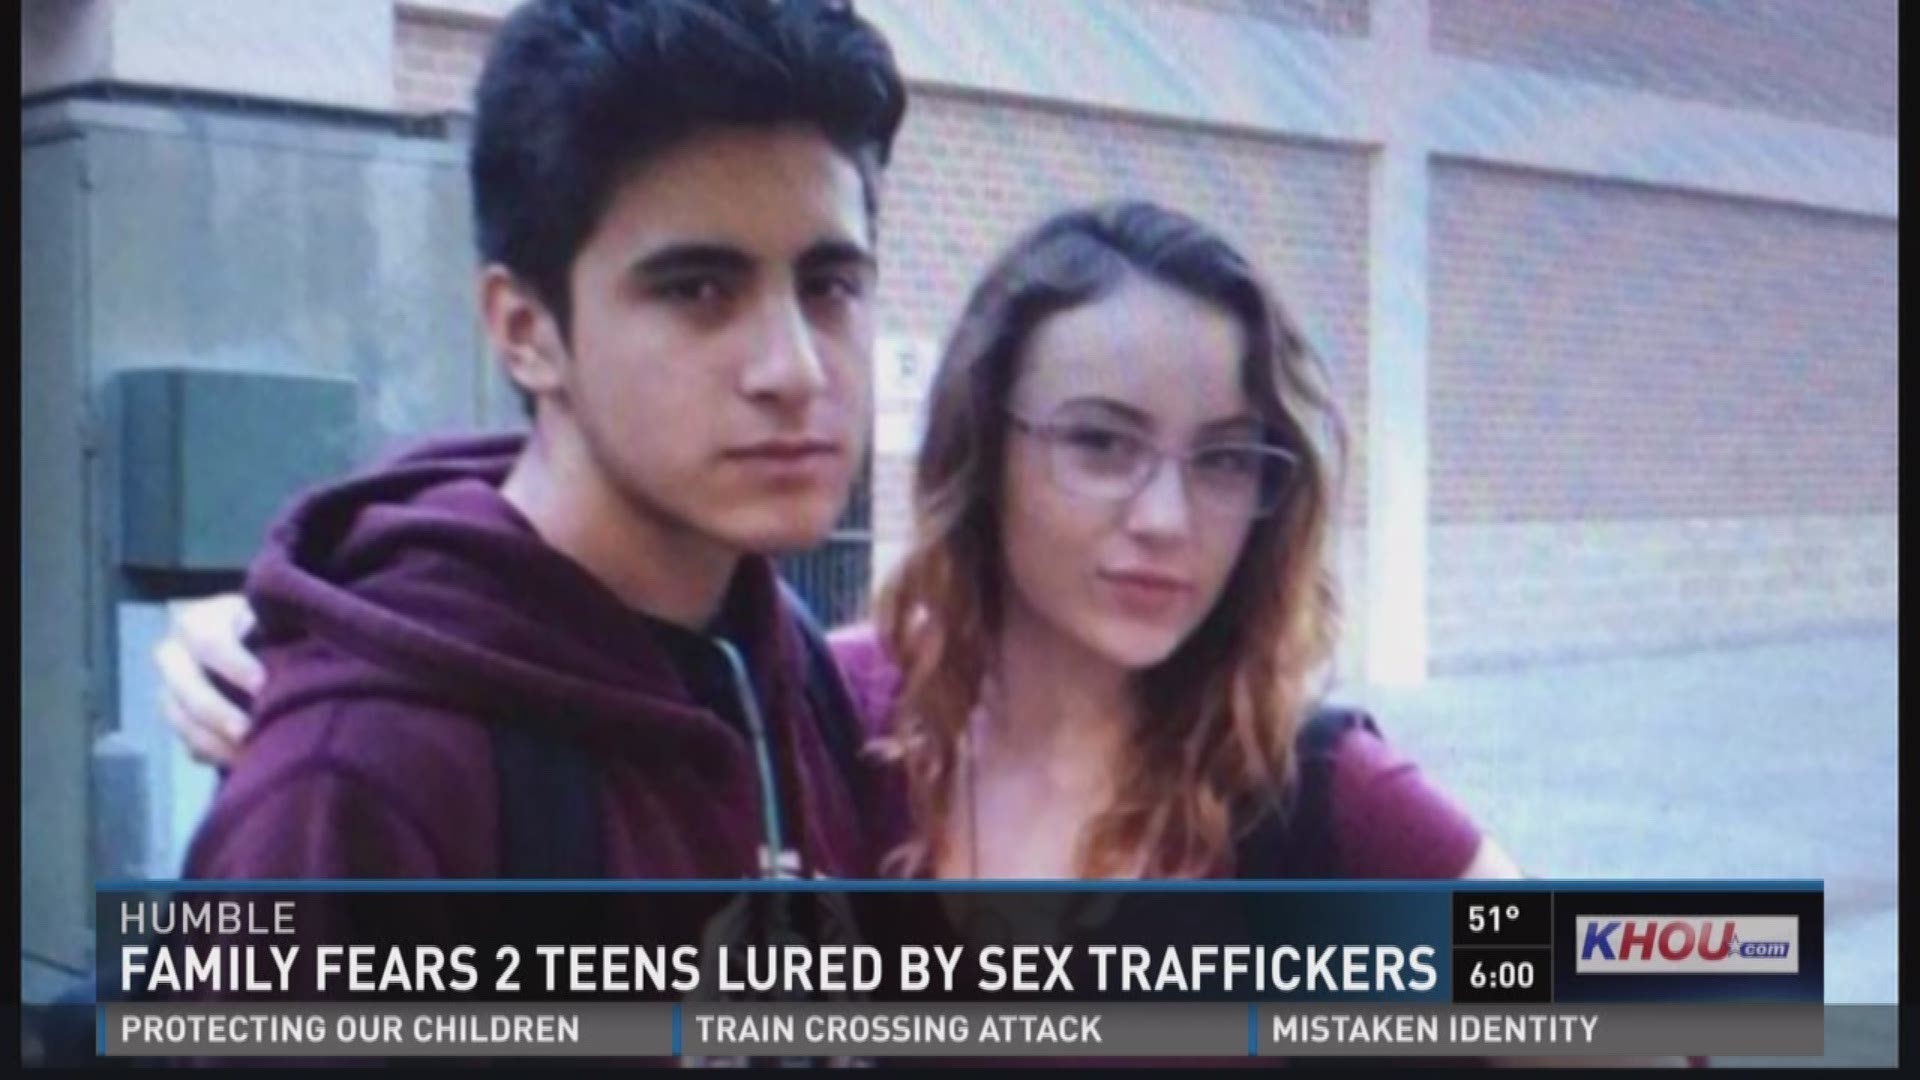 Experts fear teen couple was lured by sex traffickers khou